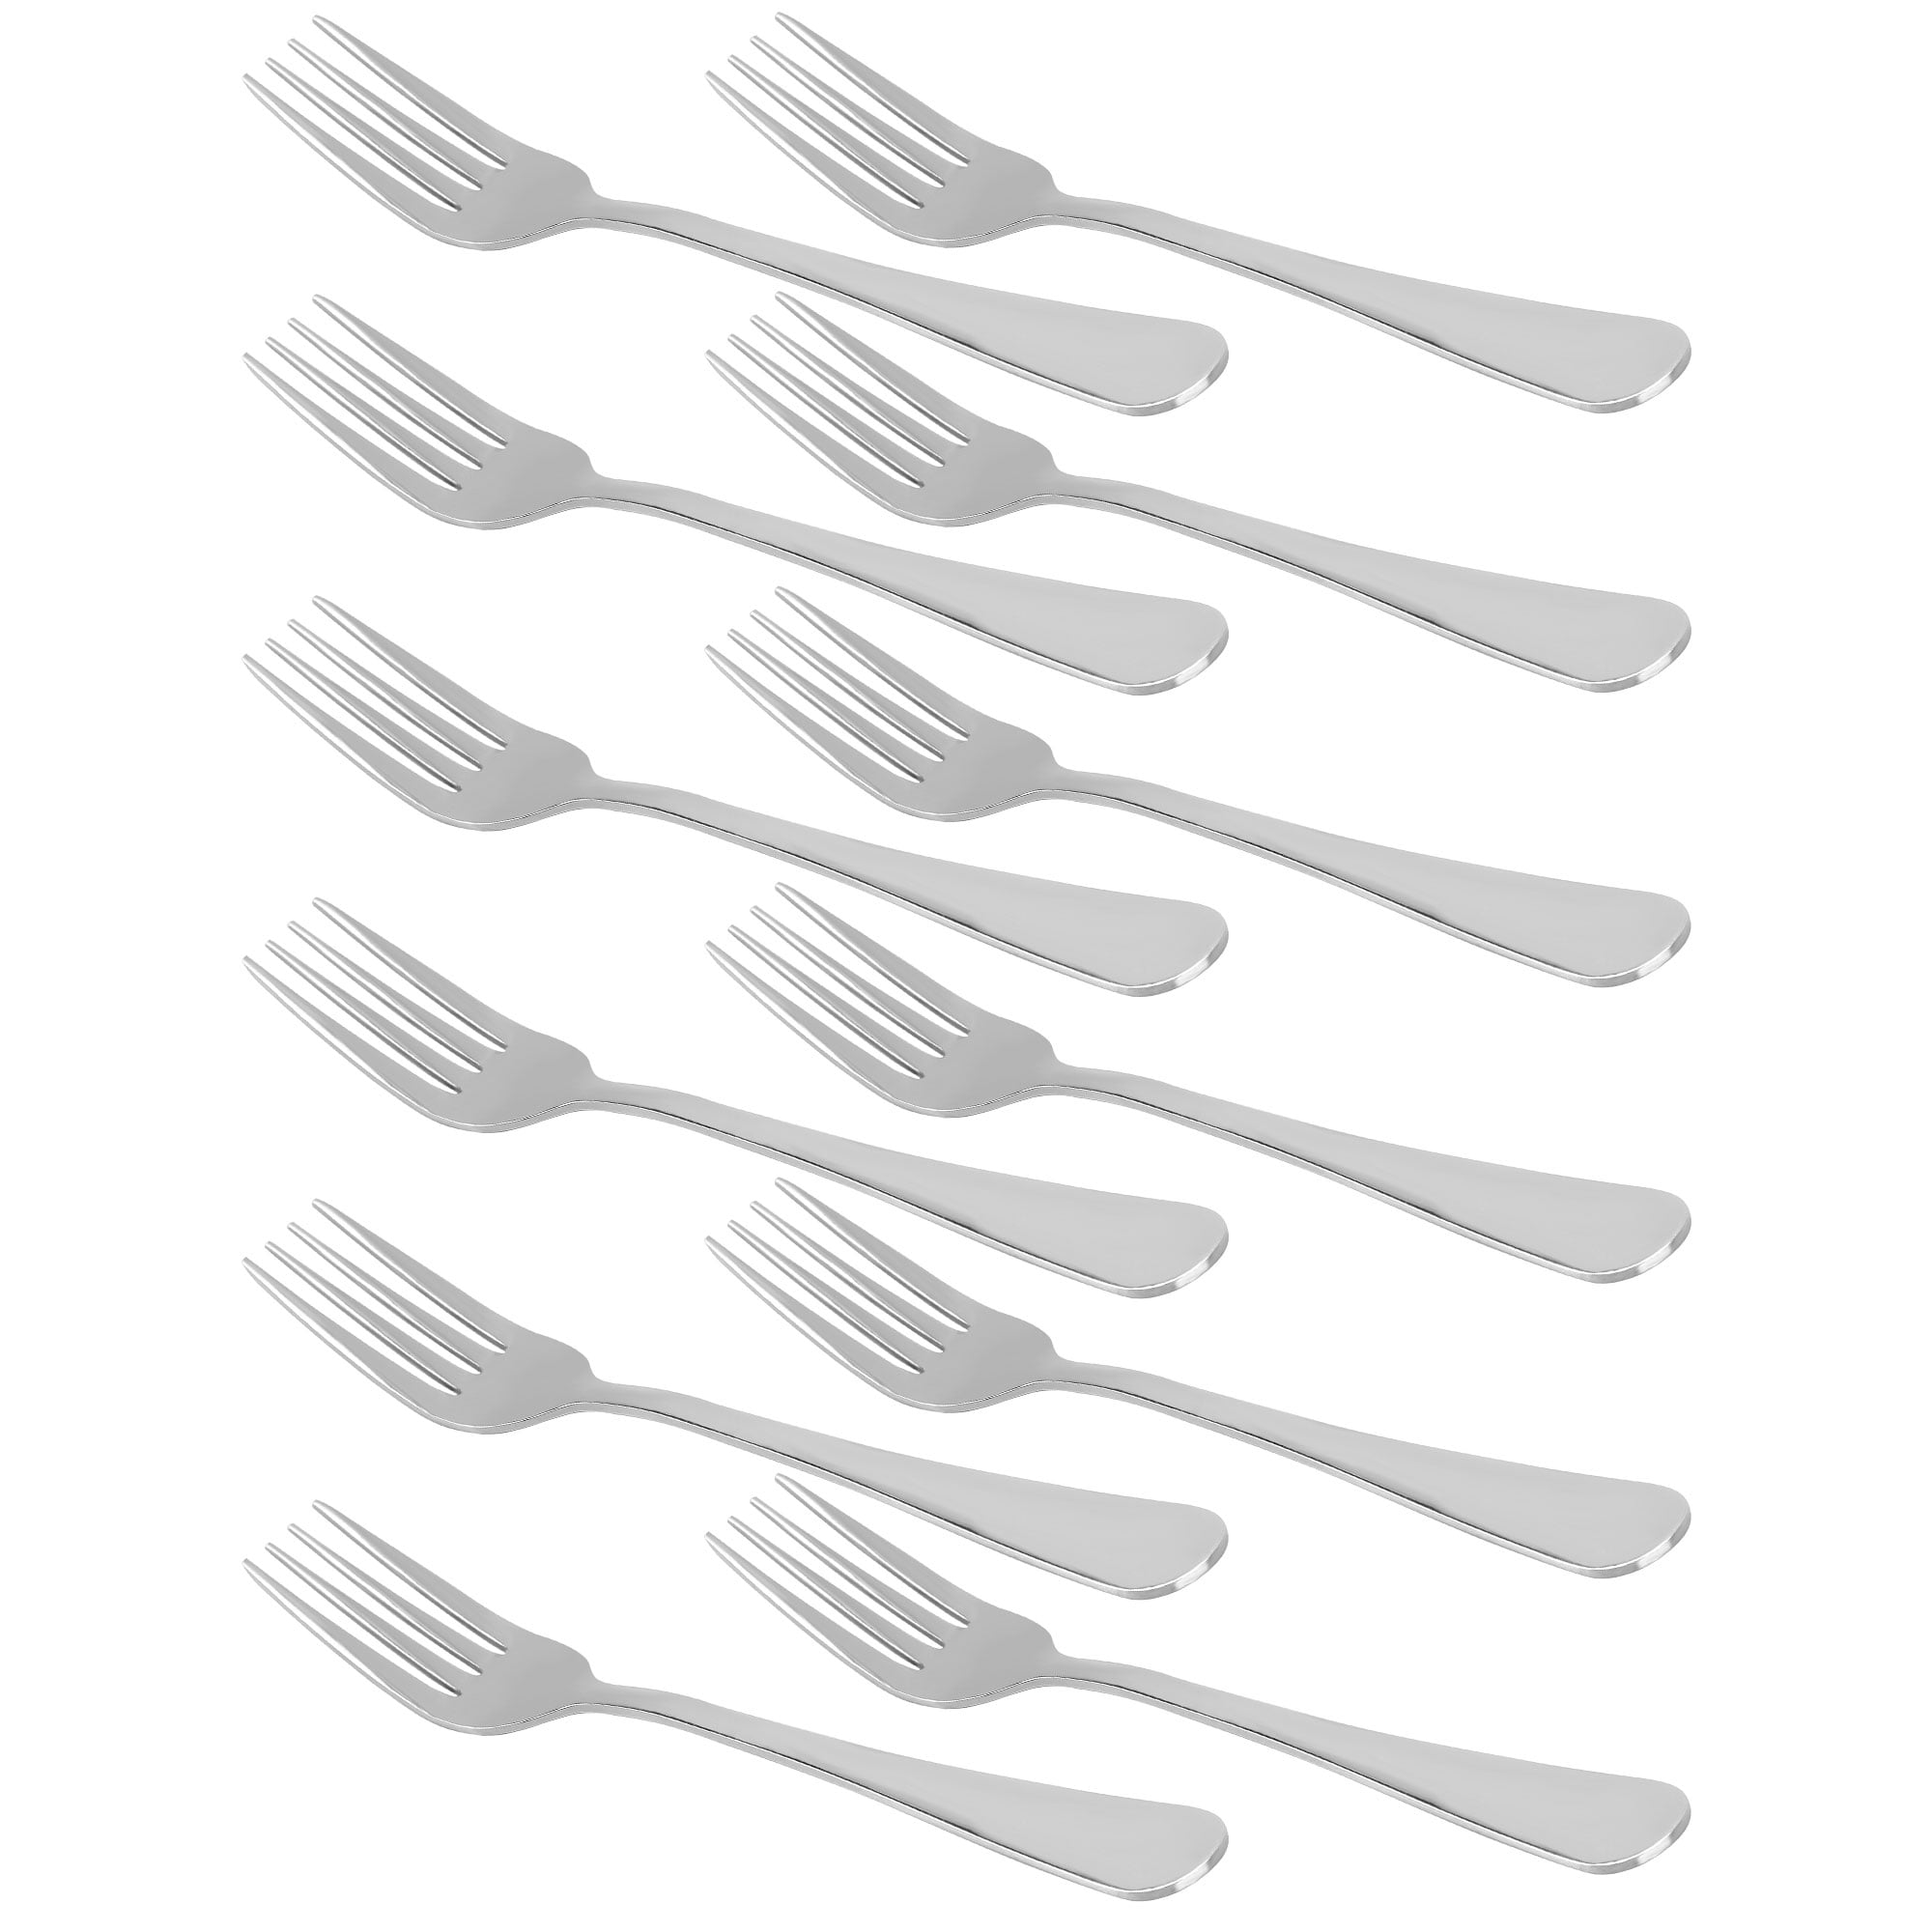 6 Piece Dessert Forks Tines Fruit Salad Fork Flatware Stainless Steel Mirror Polishing cutlery 6.50 Inch or 15 cm 